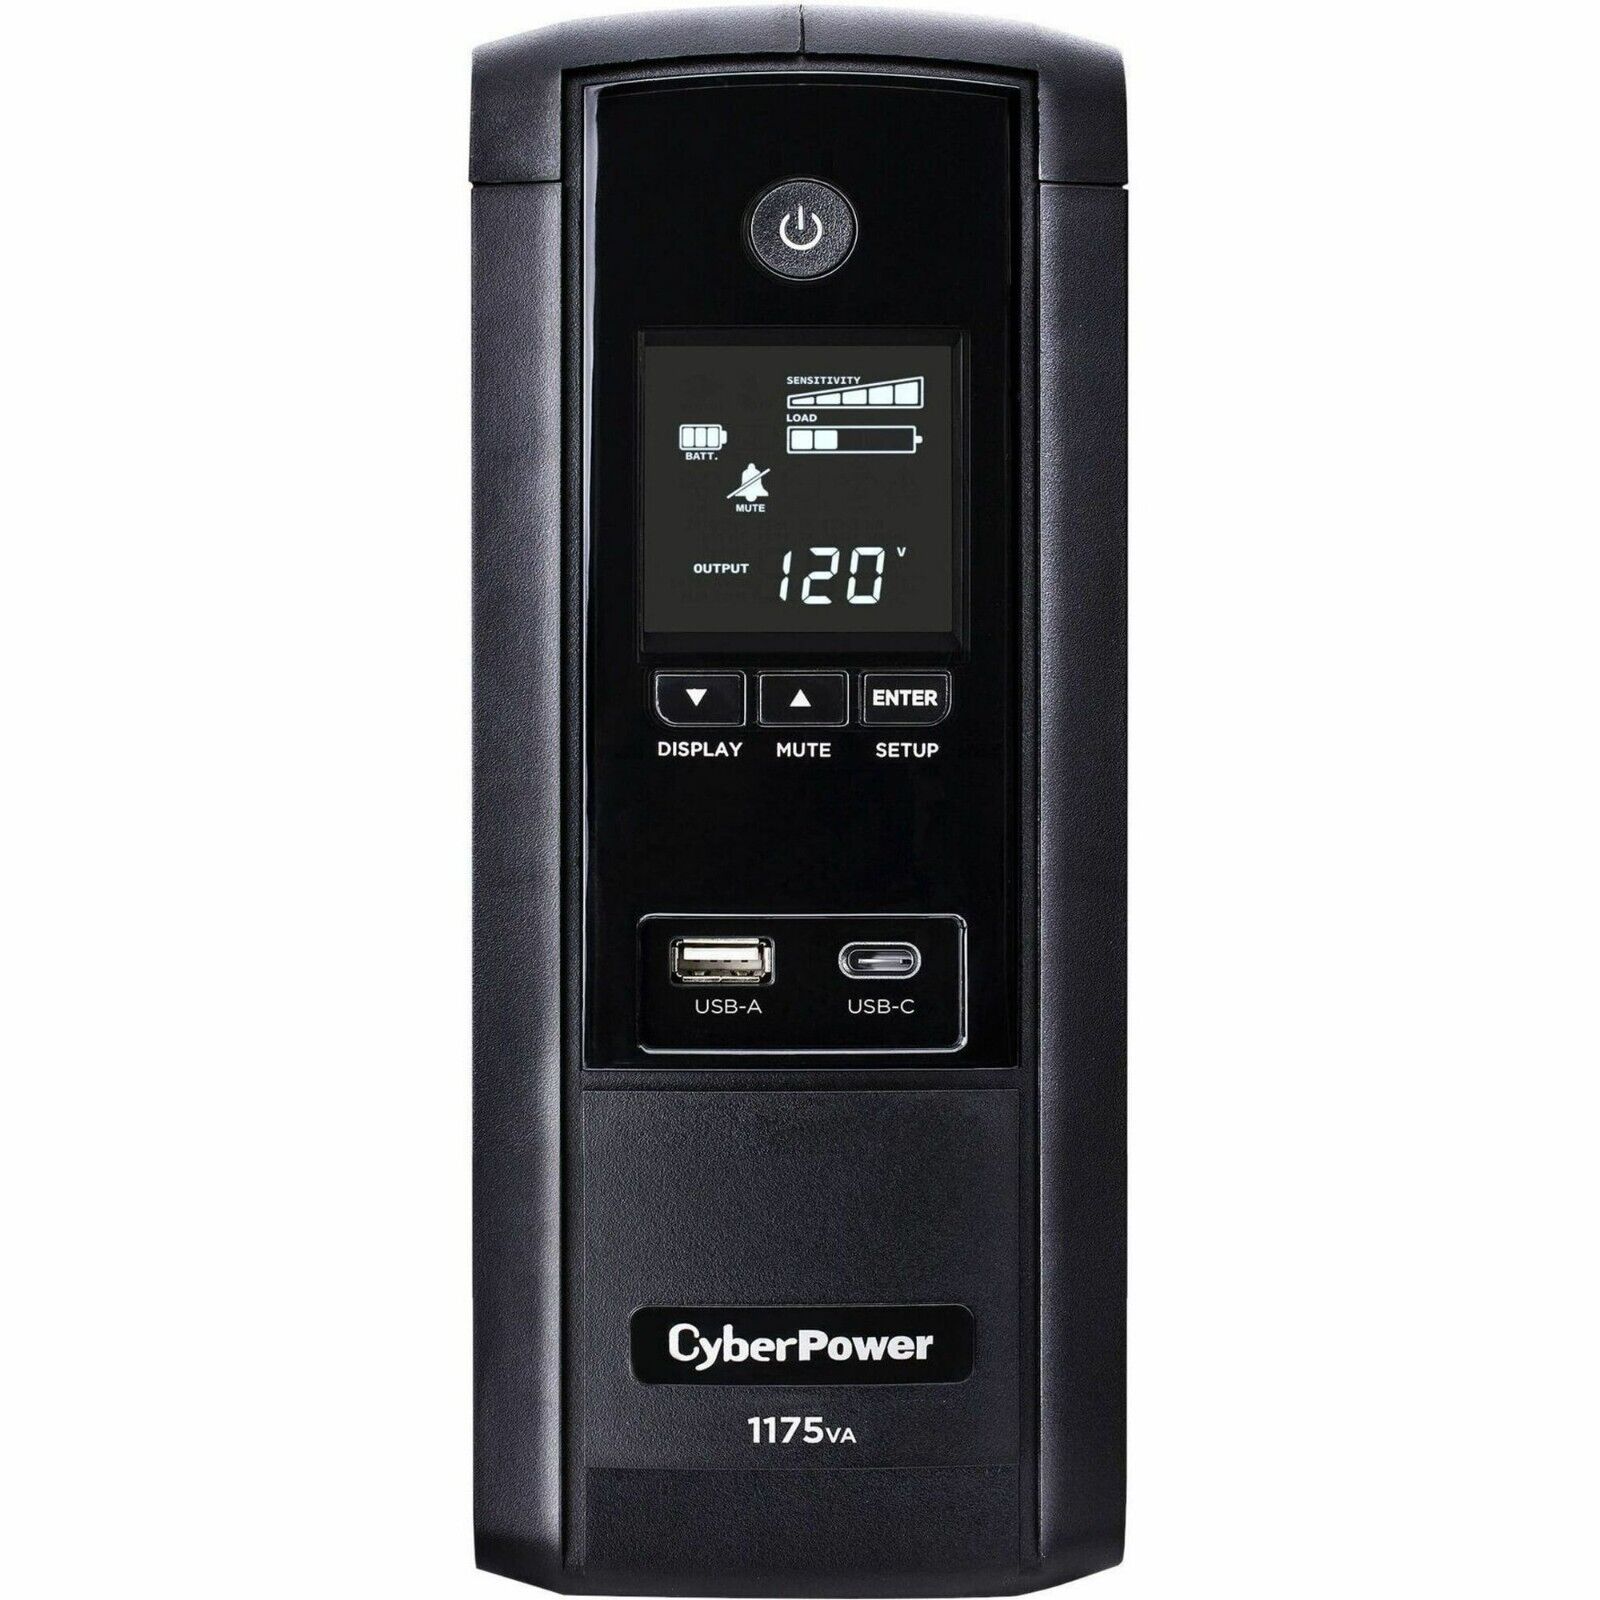 CyberPower UPS S175UC 1175VA Battery Backup with Surge Protection - [LN]™